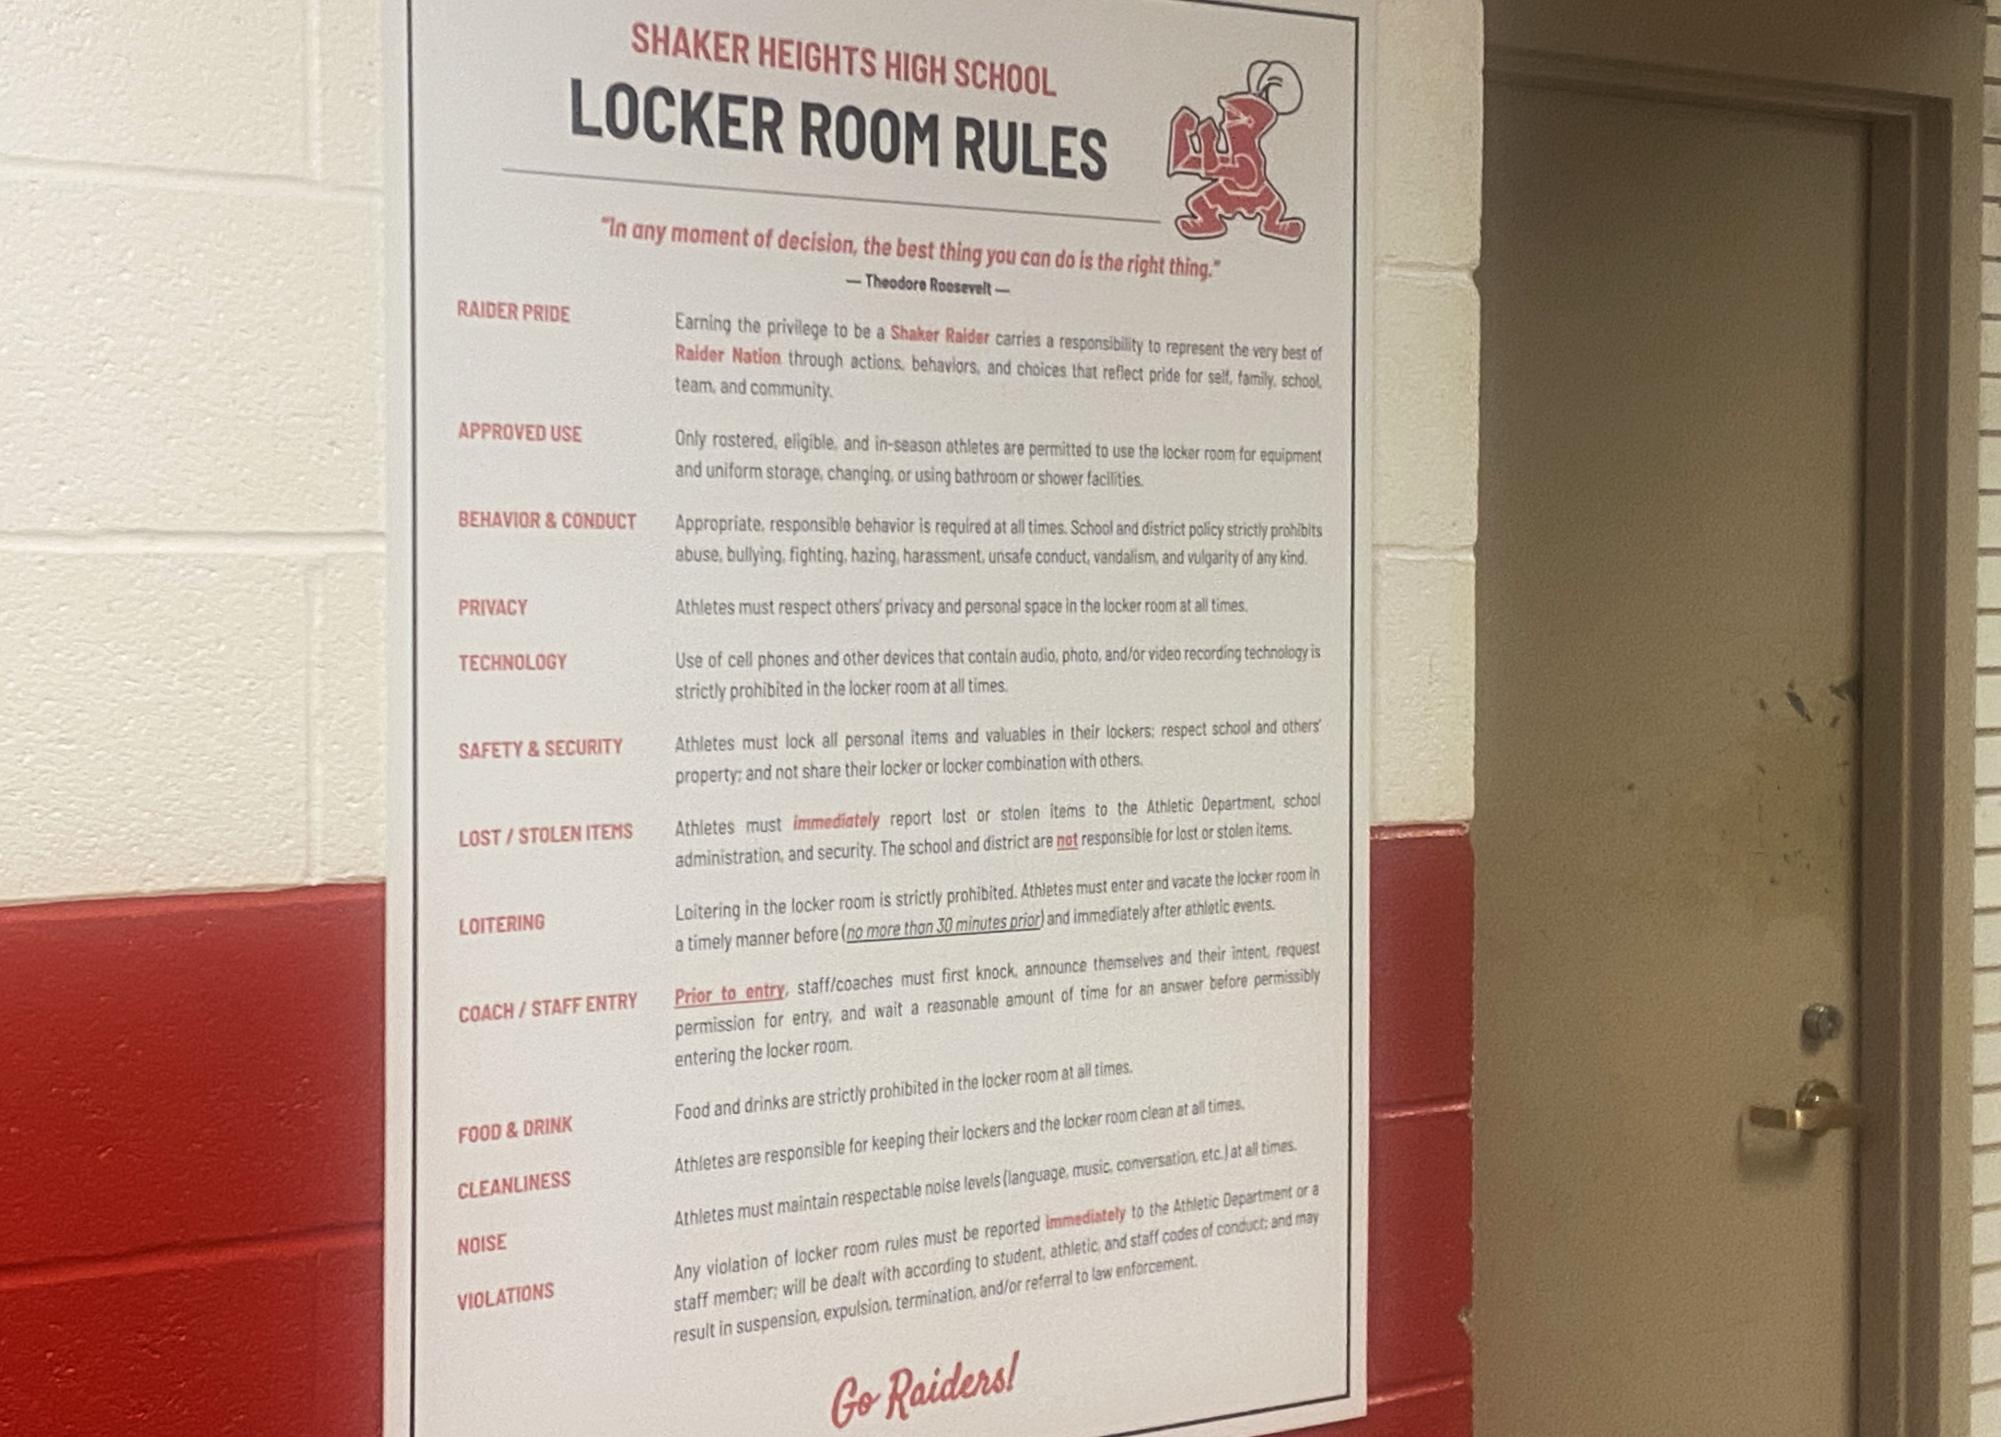 Posters detailing rules for locker room behavior were installed before school resumed this year. 